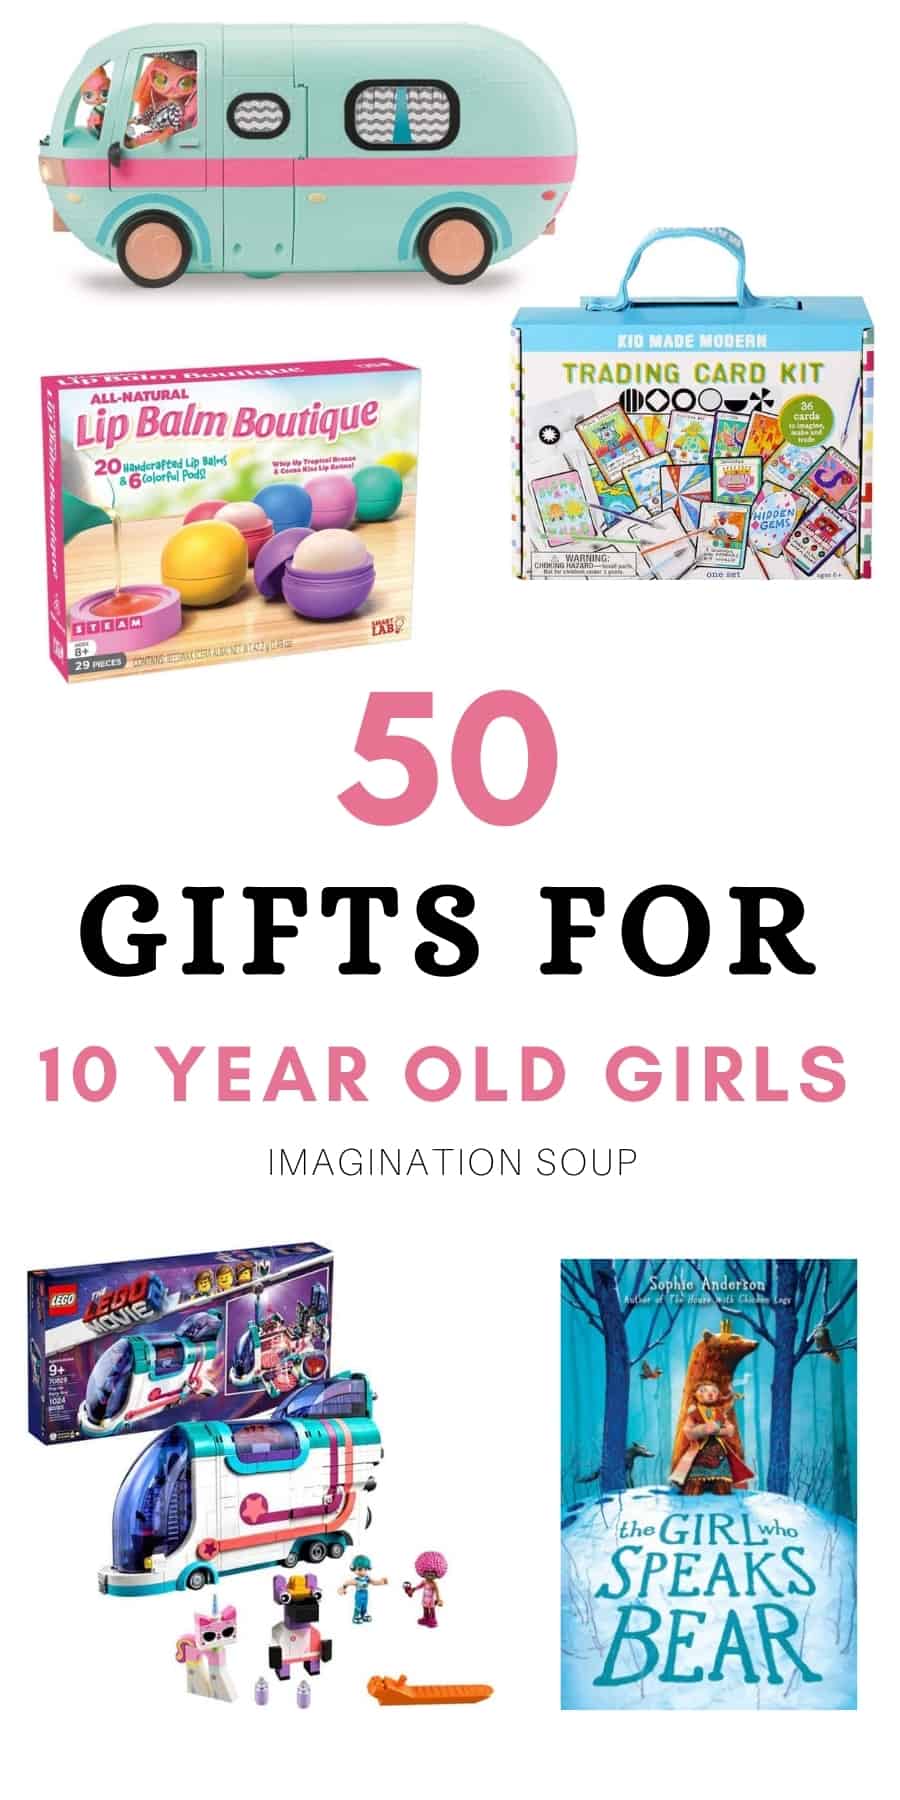 Christmas Present Ideas For Girls Age 10 / Gift Ideas For 10 12 Years